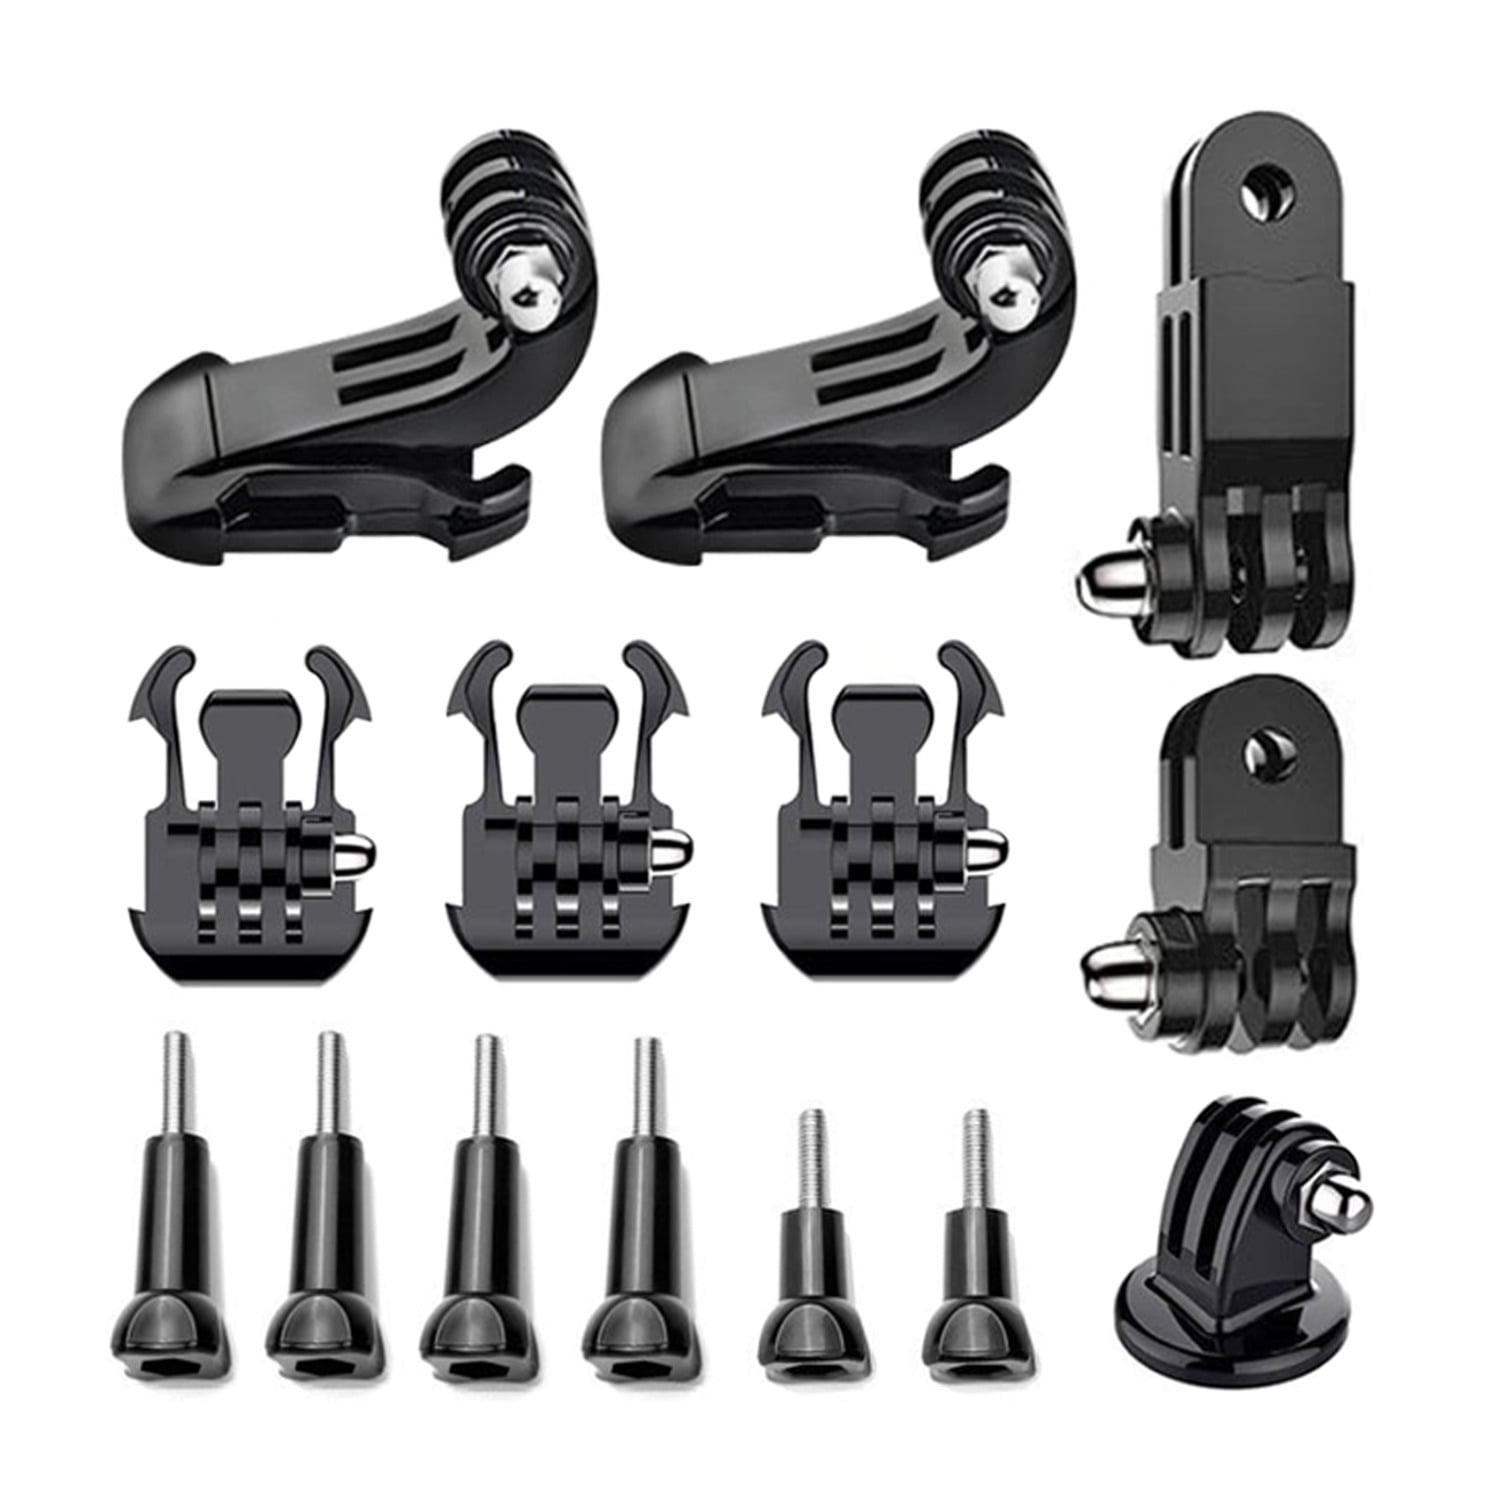 Ape Basics: 50-in-1 Action Camera Accessories Kit for GoPro Hero